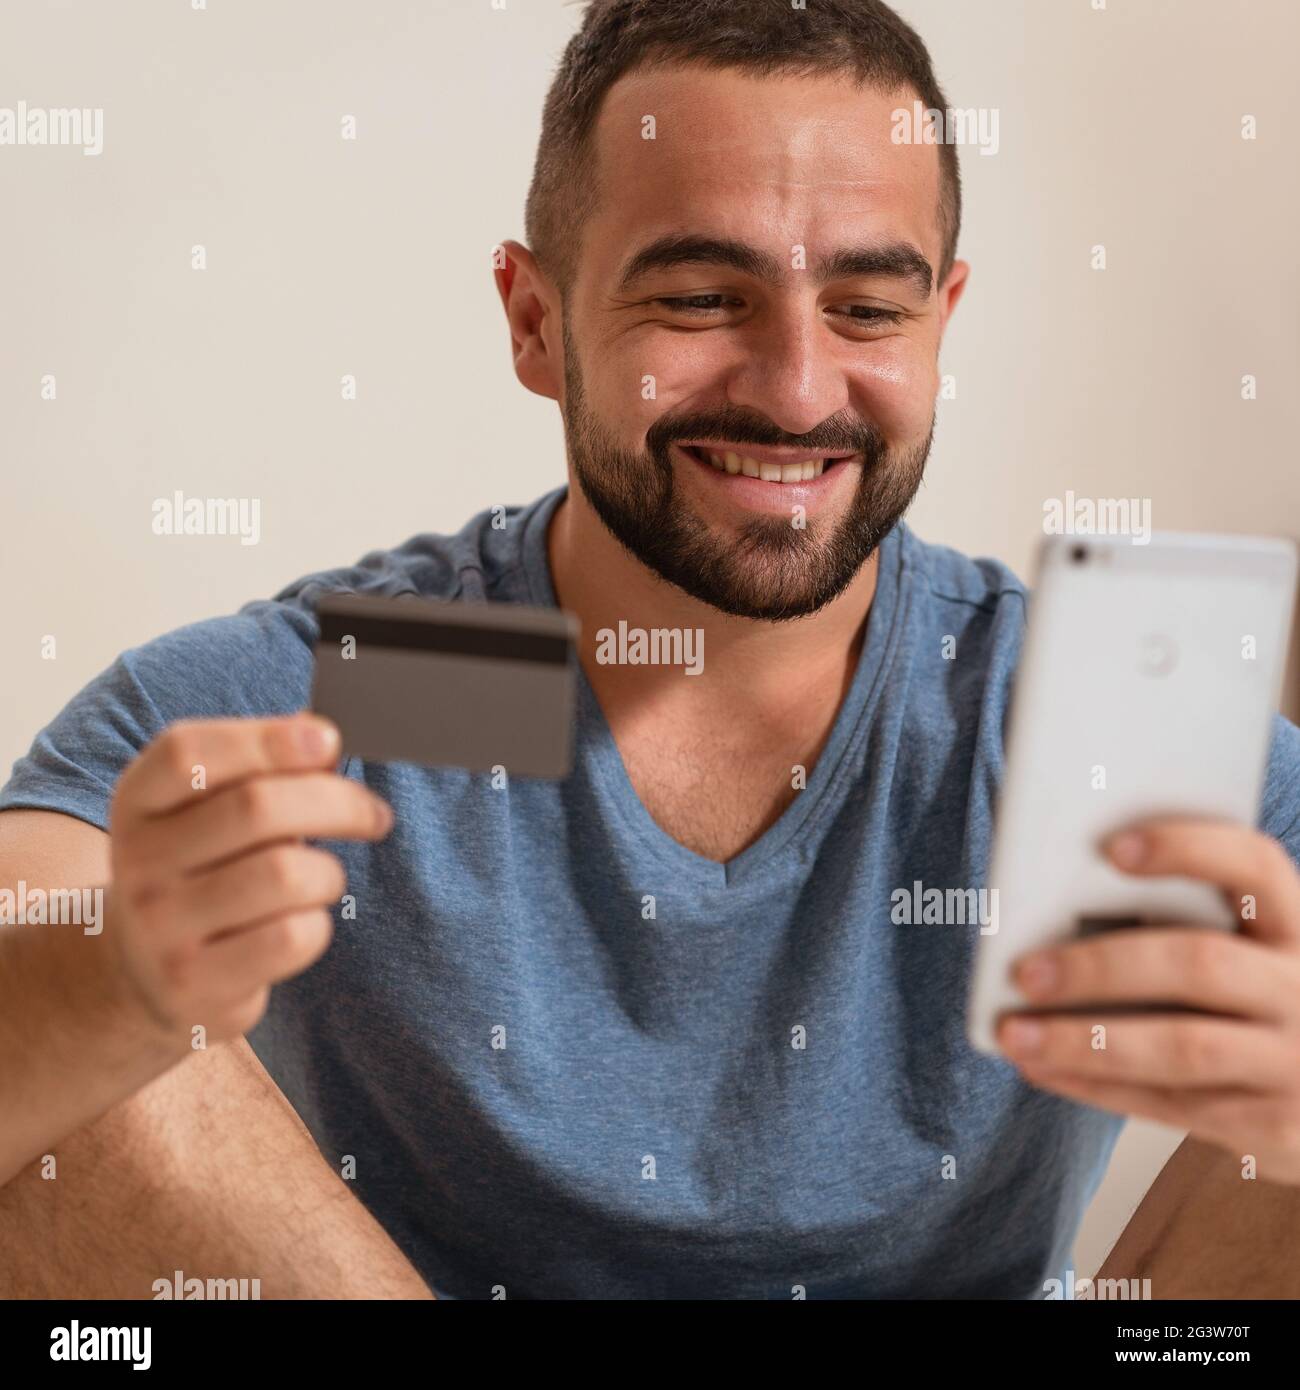 Square image of a cheerful man with smartphone and debit or credit card buying online equipment or doing sport bets and gambling Stock Photo